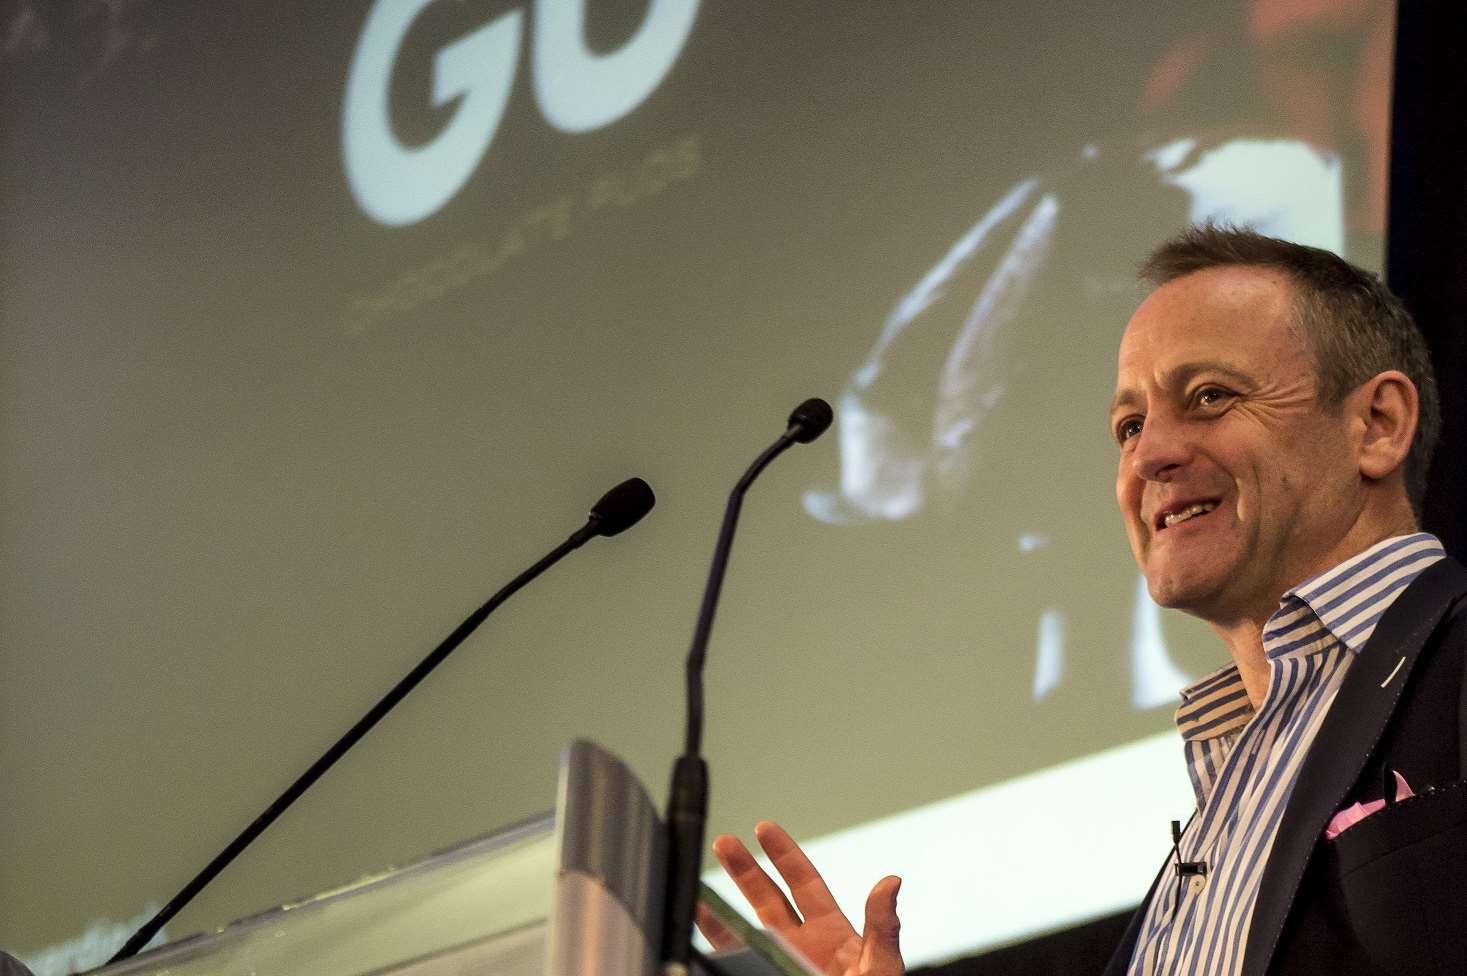 Gu founder James Averdieck spoke on the highs and lows of owning a multi-million pound company